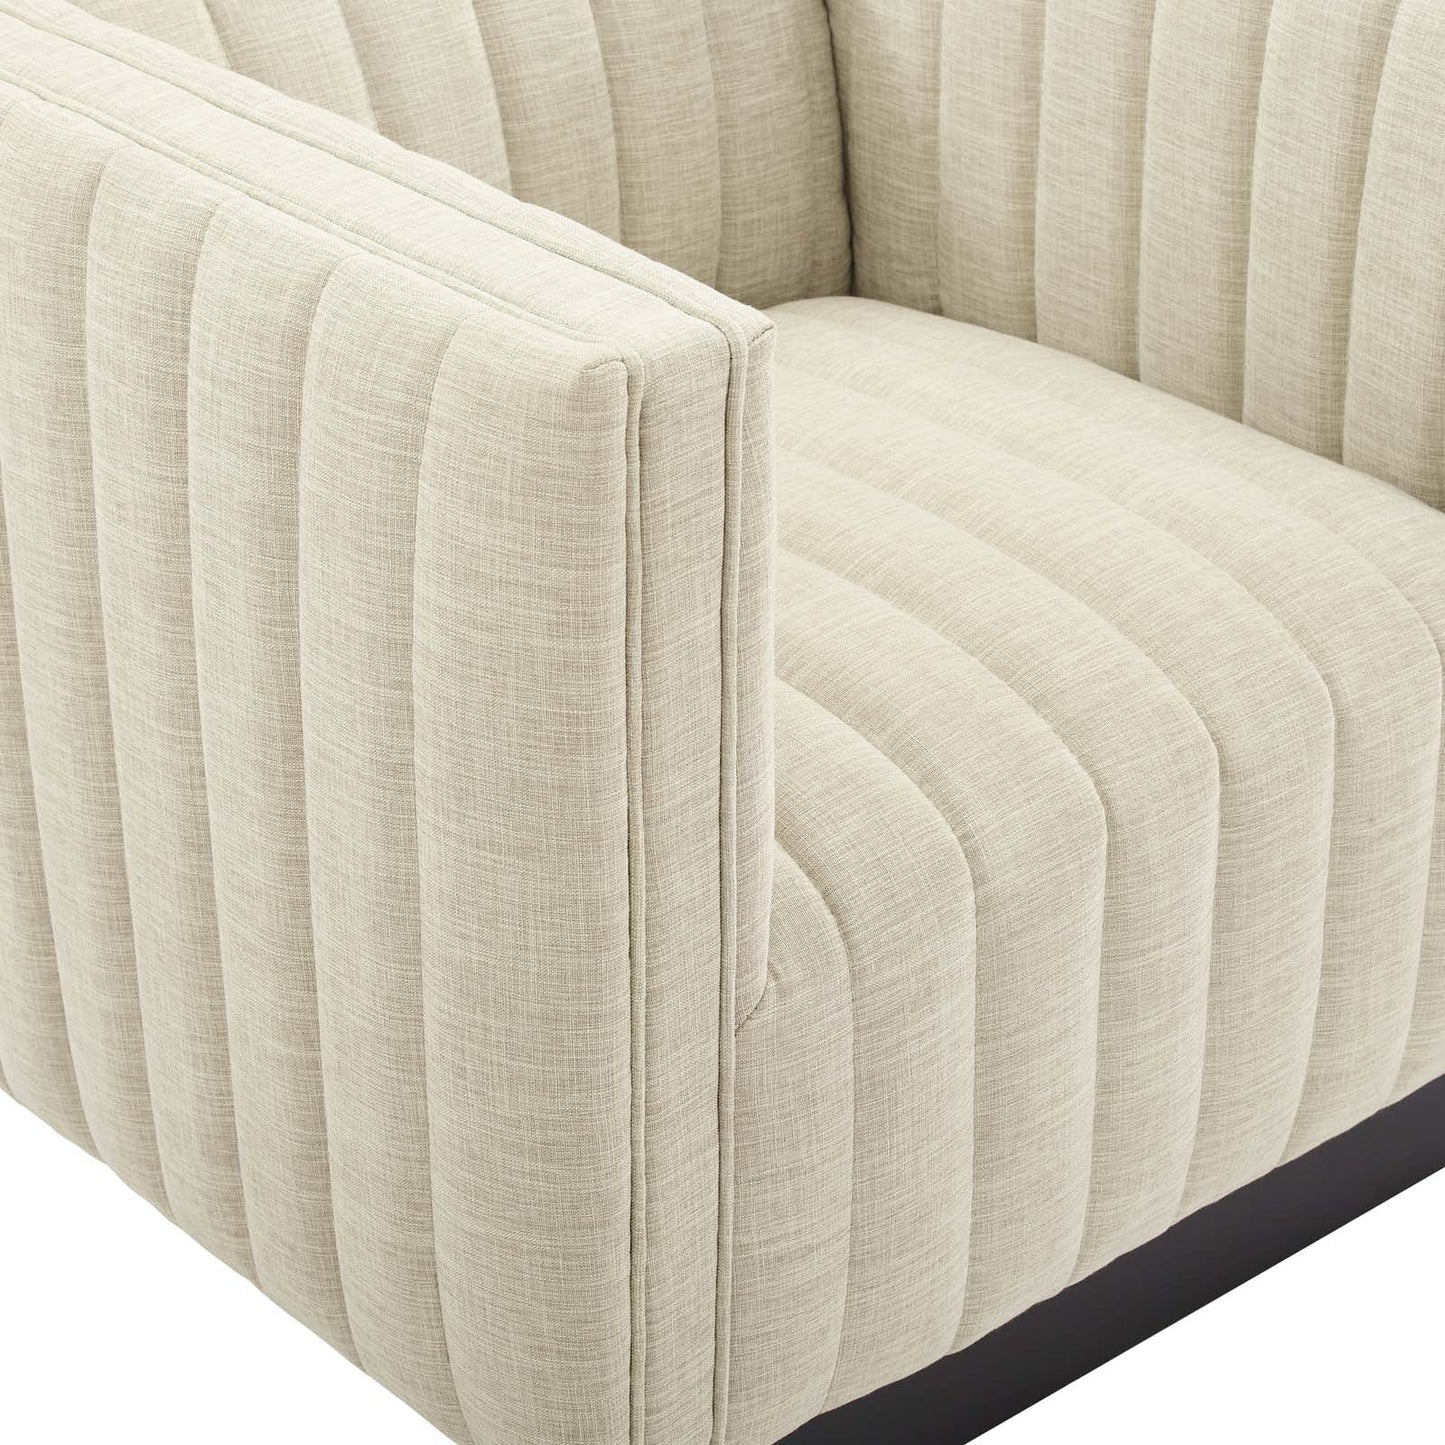 Everett Upholstered Fabric Accent Chair